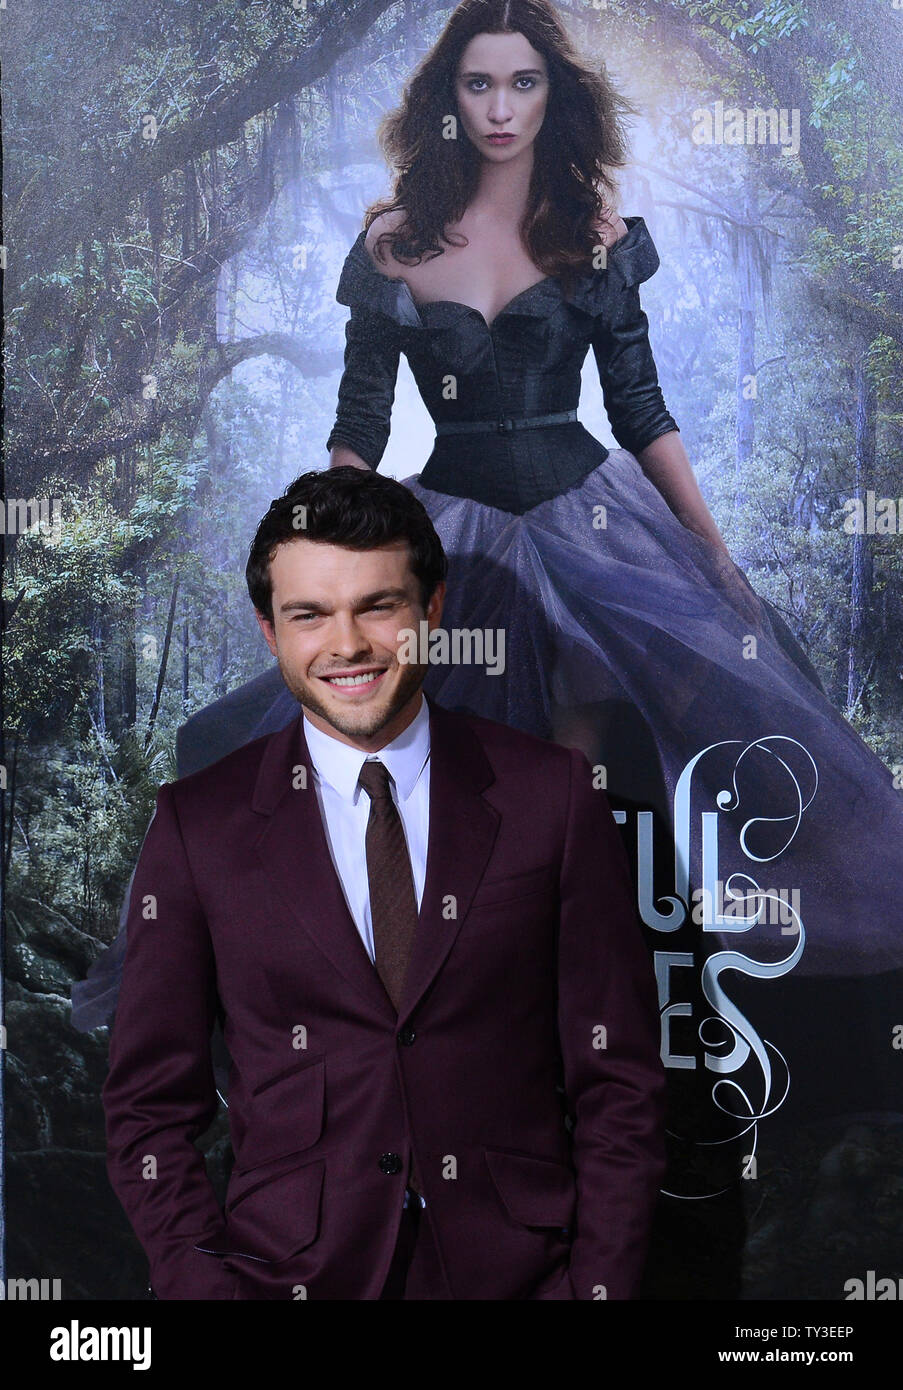 Actor Alden Ehrenreich, a cast member in the motion picture romance drama 